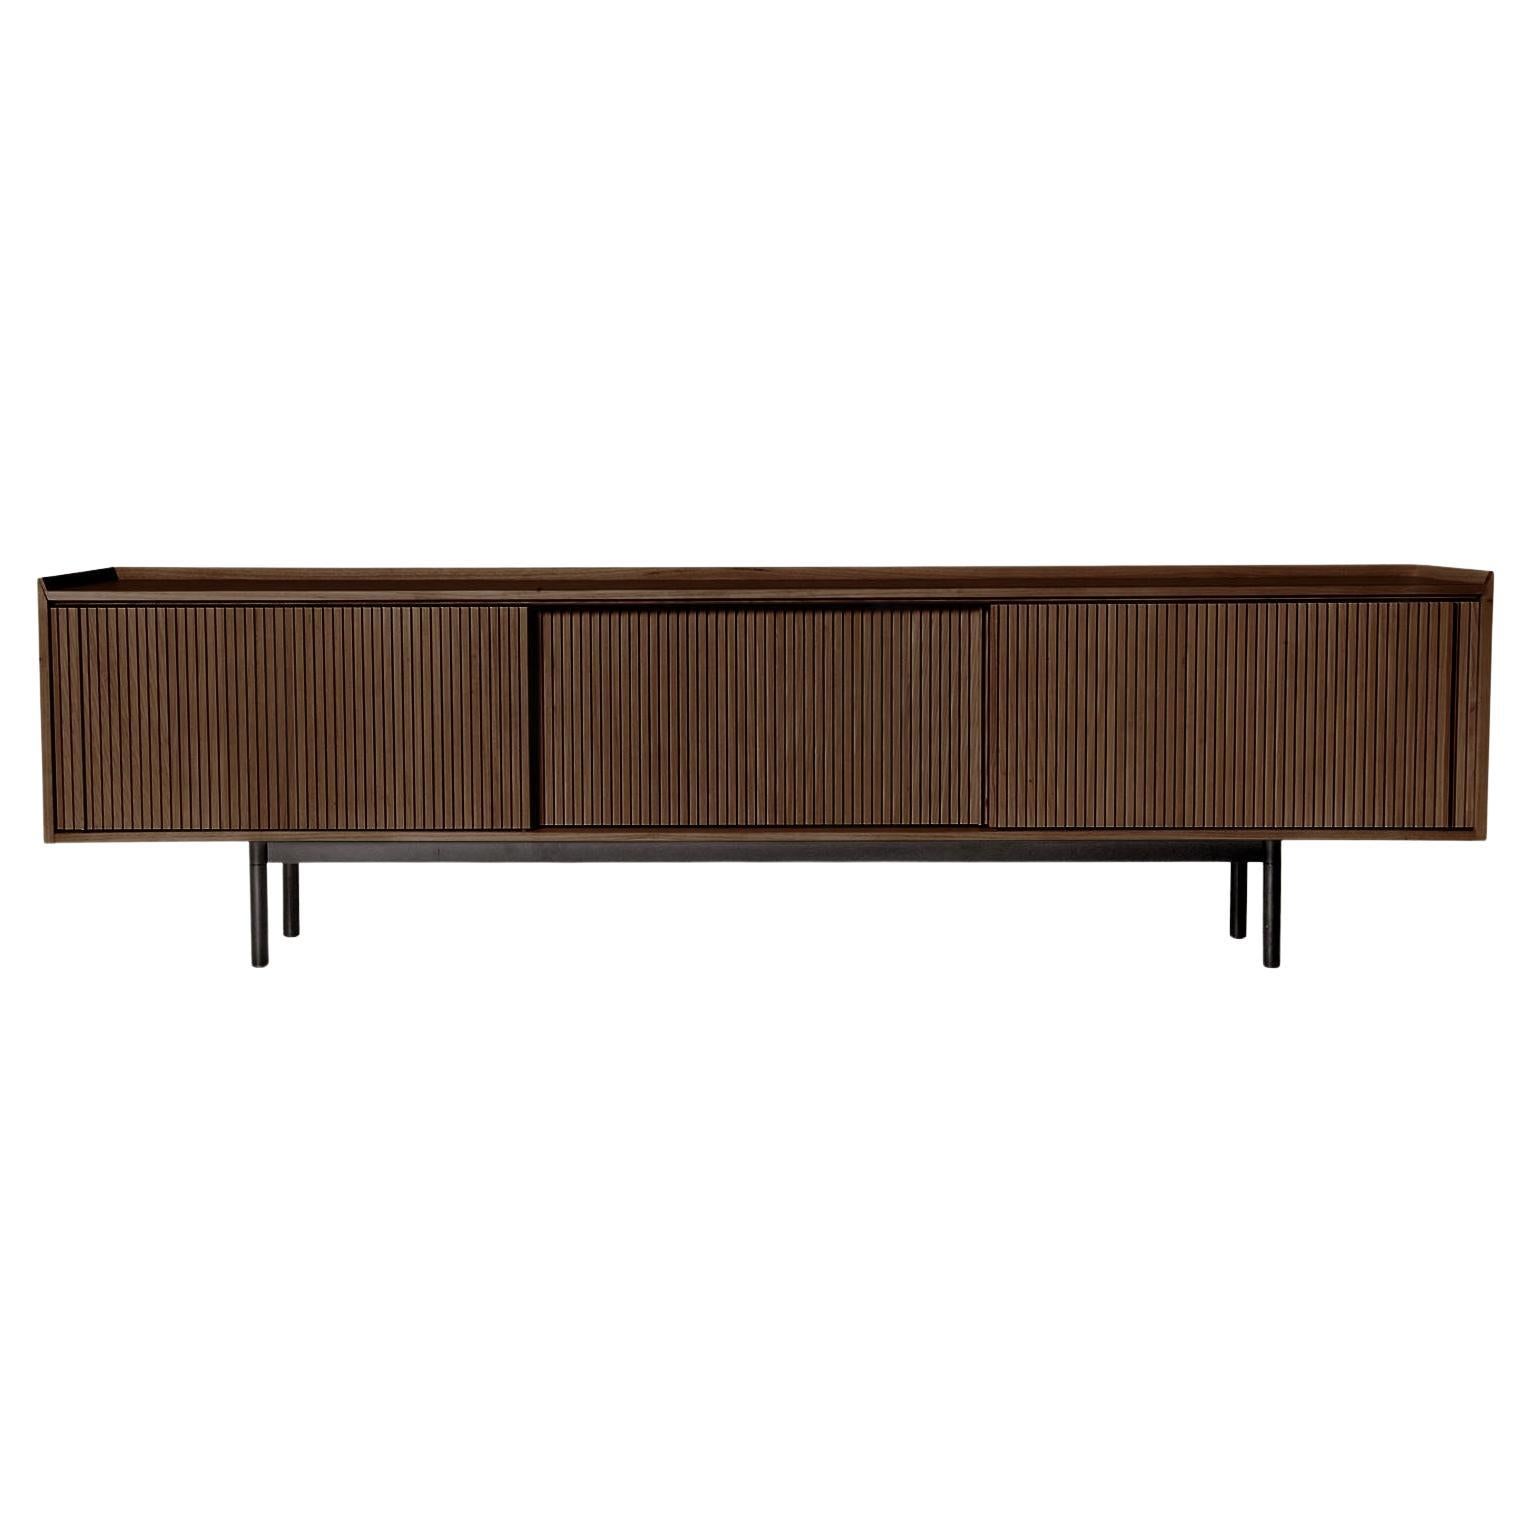 Sipario Solid Wood Sideboard, Ash in Brown Finish, 3 Doors, Contemporary